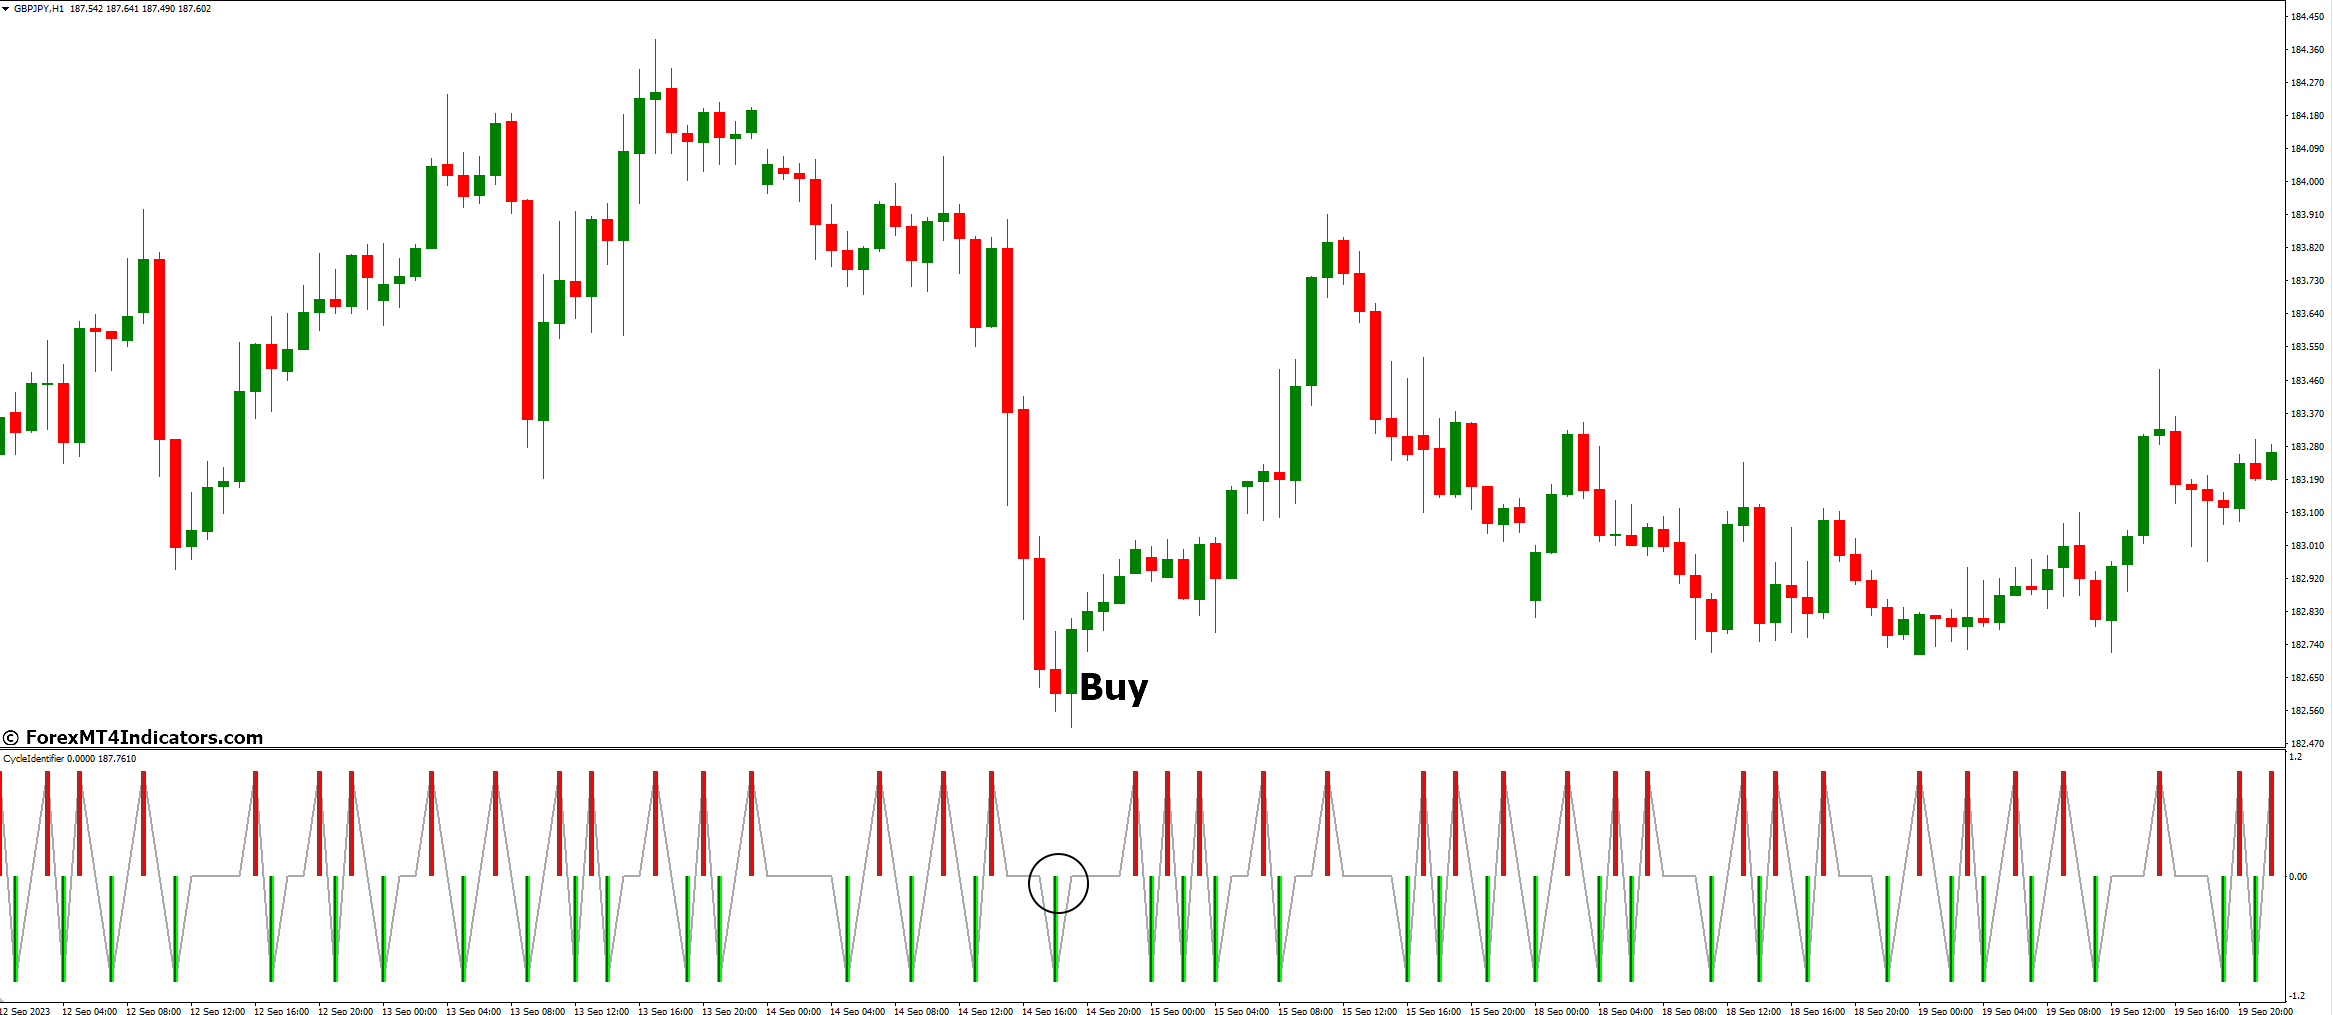 How to Trade with Cycle Identifier Indicator - Buy Entry